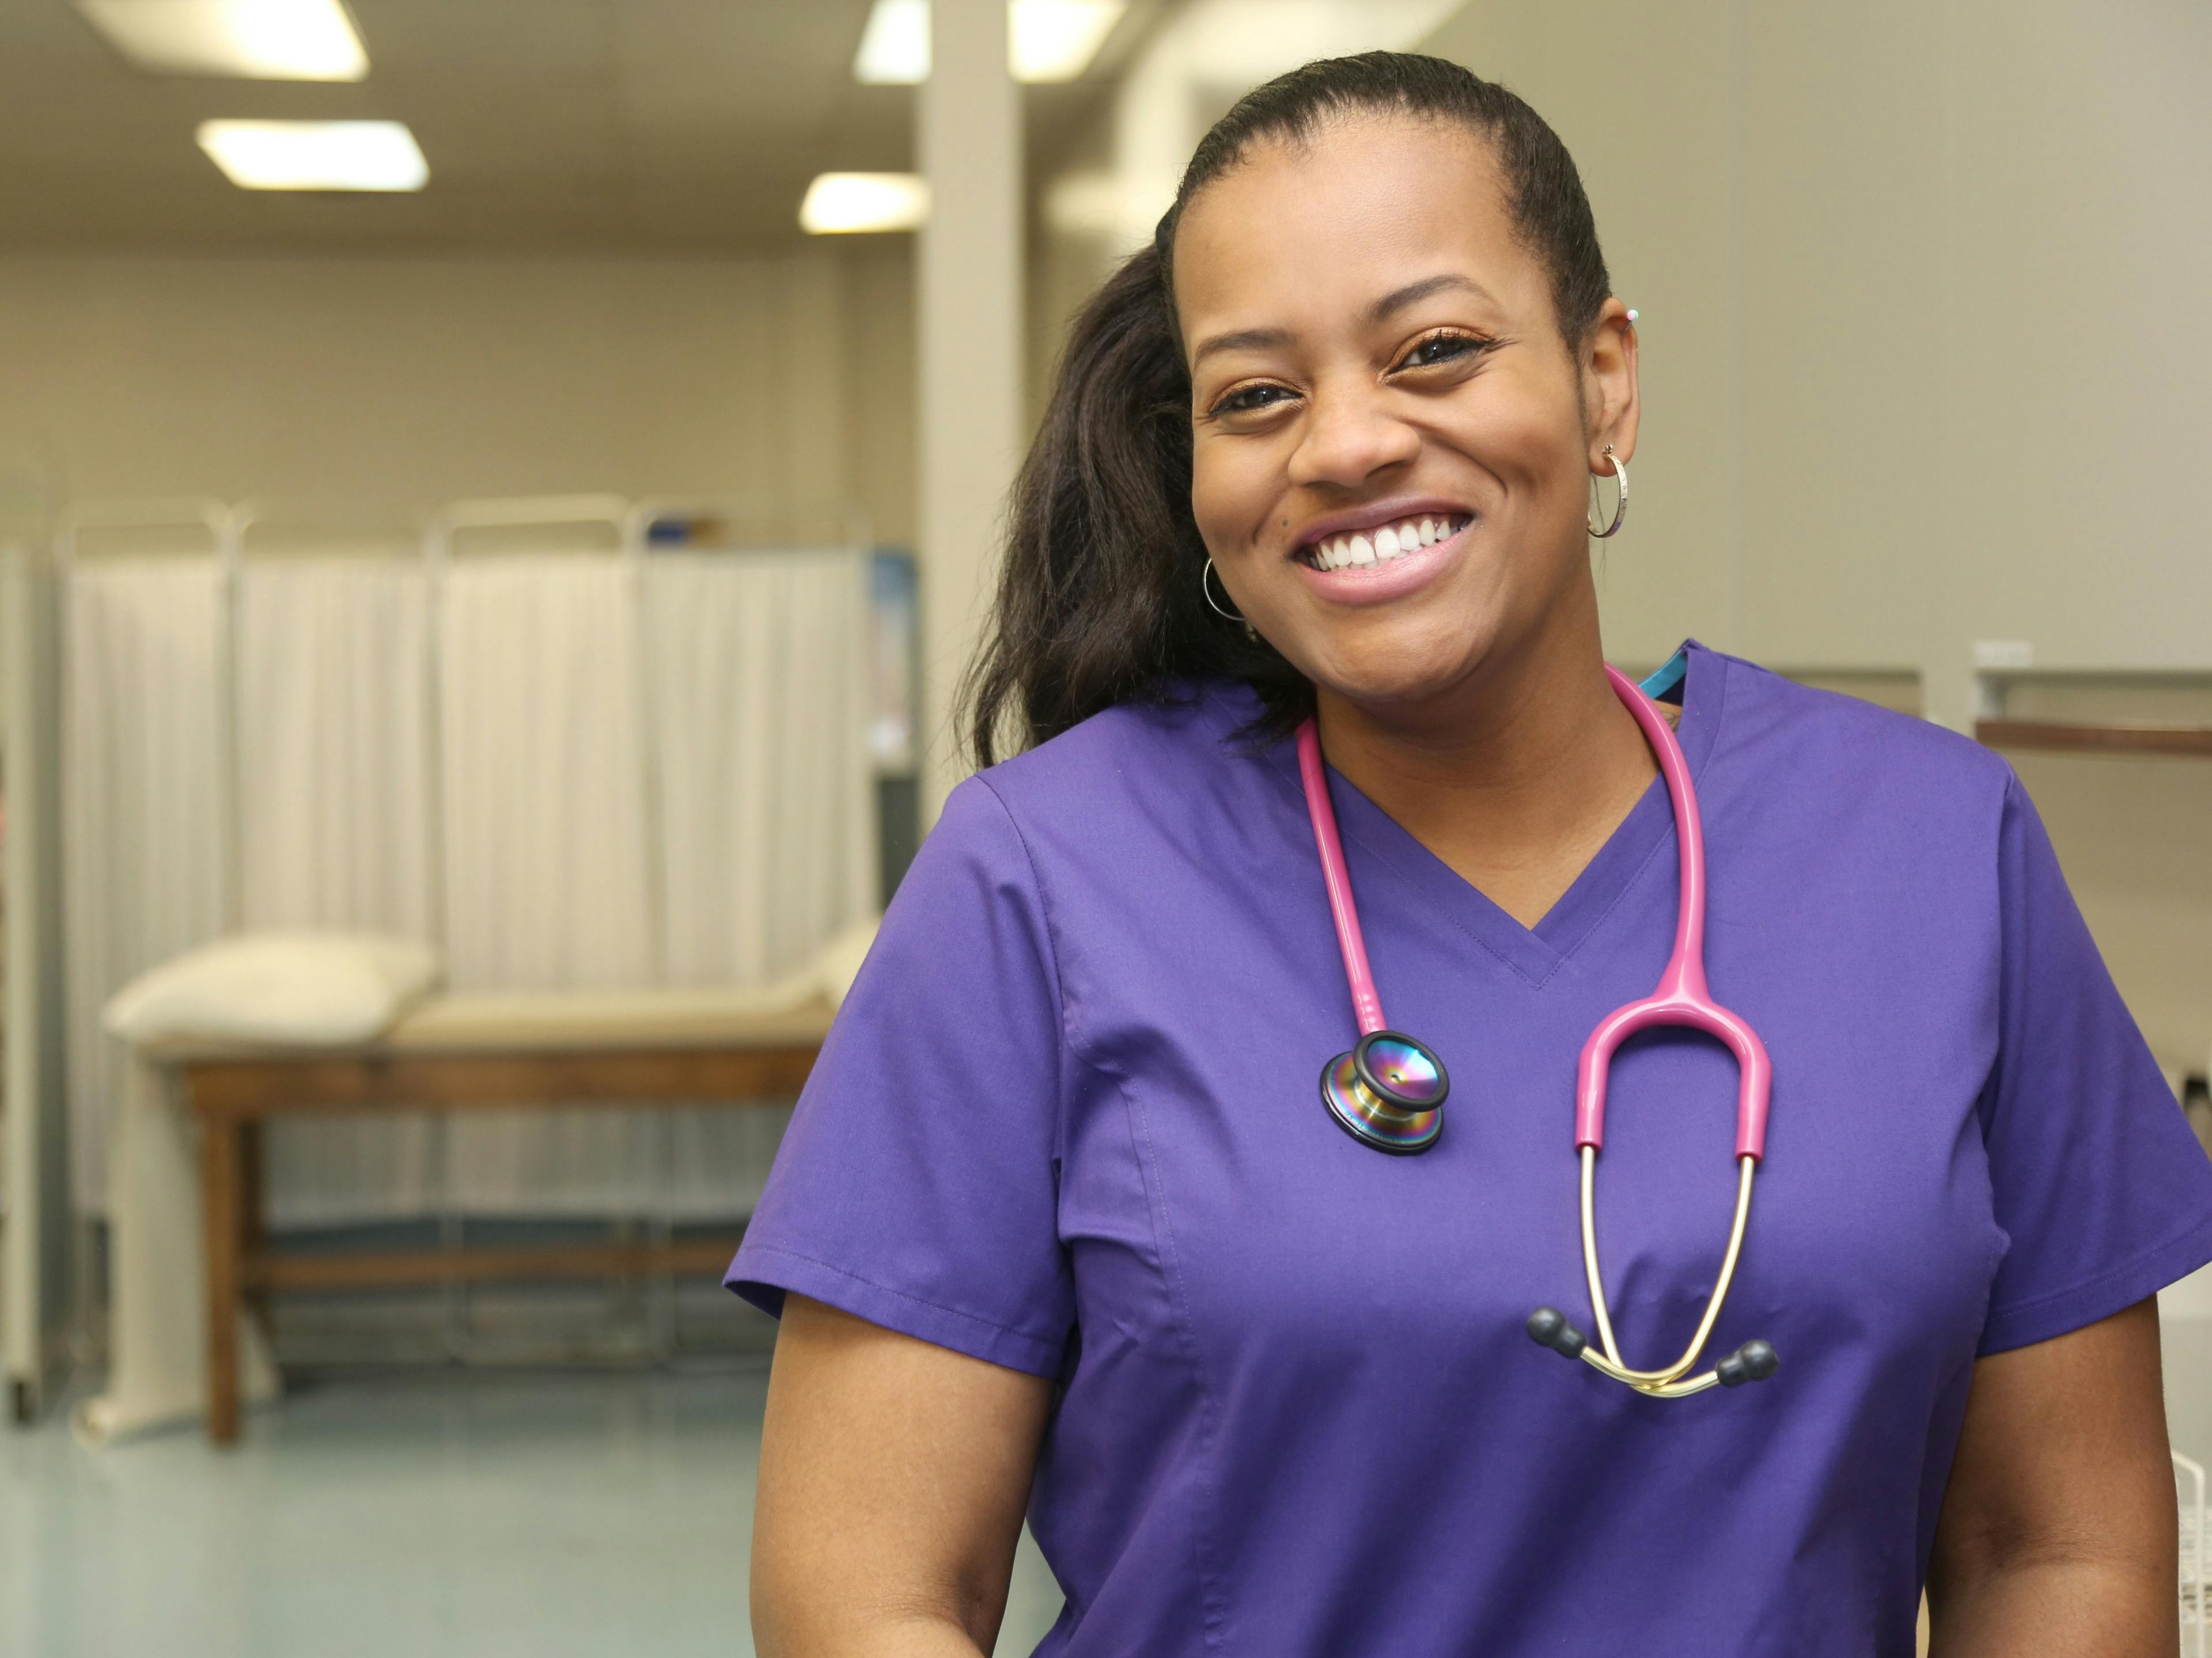 What nurse practitioners should know about diversity, equity, and inclusion